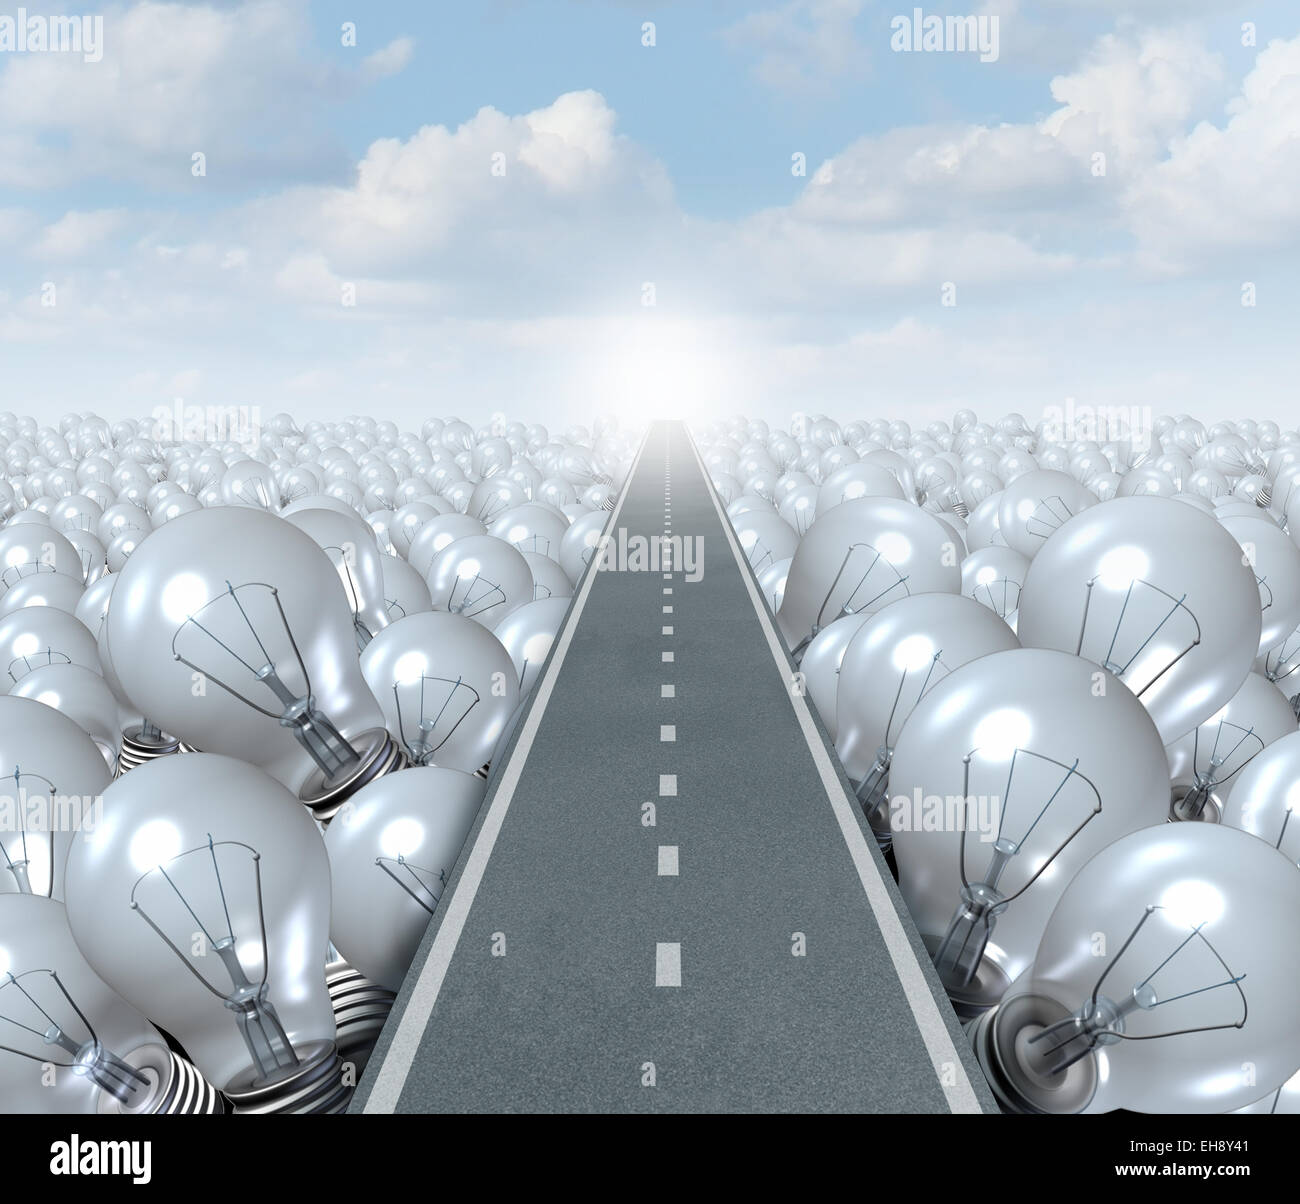 Idea road and creative Path business concept as a street or highway cutting through a landscape of light bulbs as a symbol and metaphor for innovation success and brainstorming solution. Stock Photo